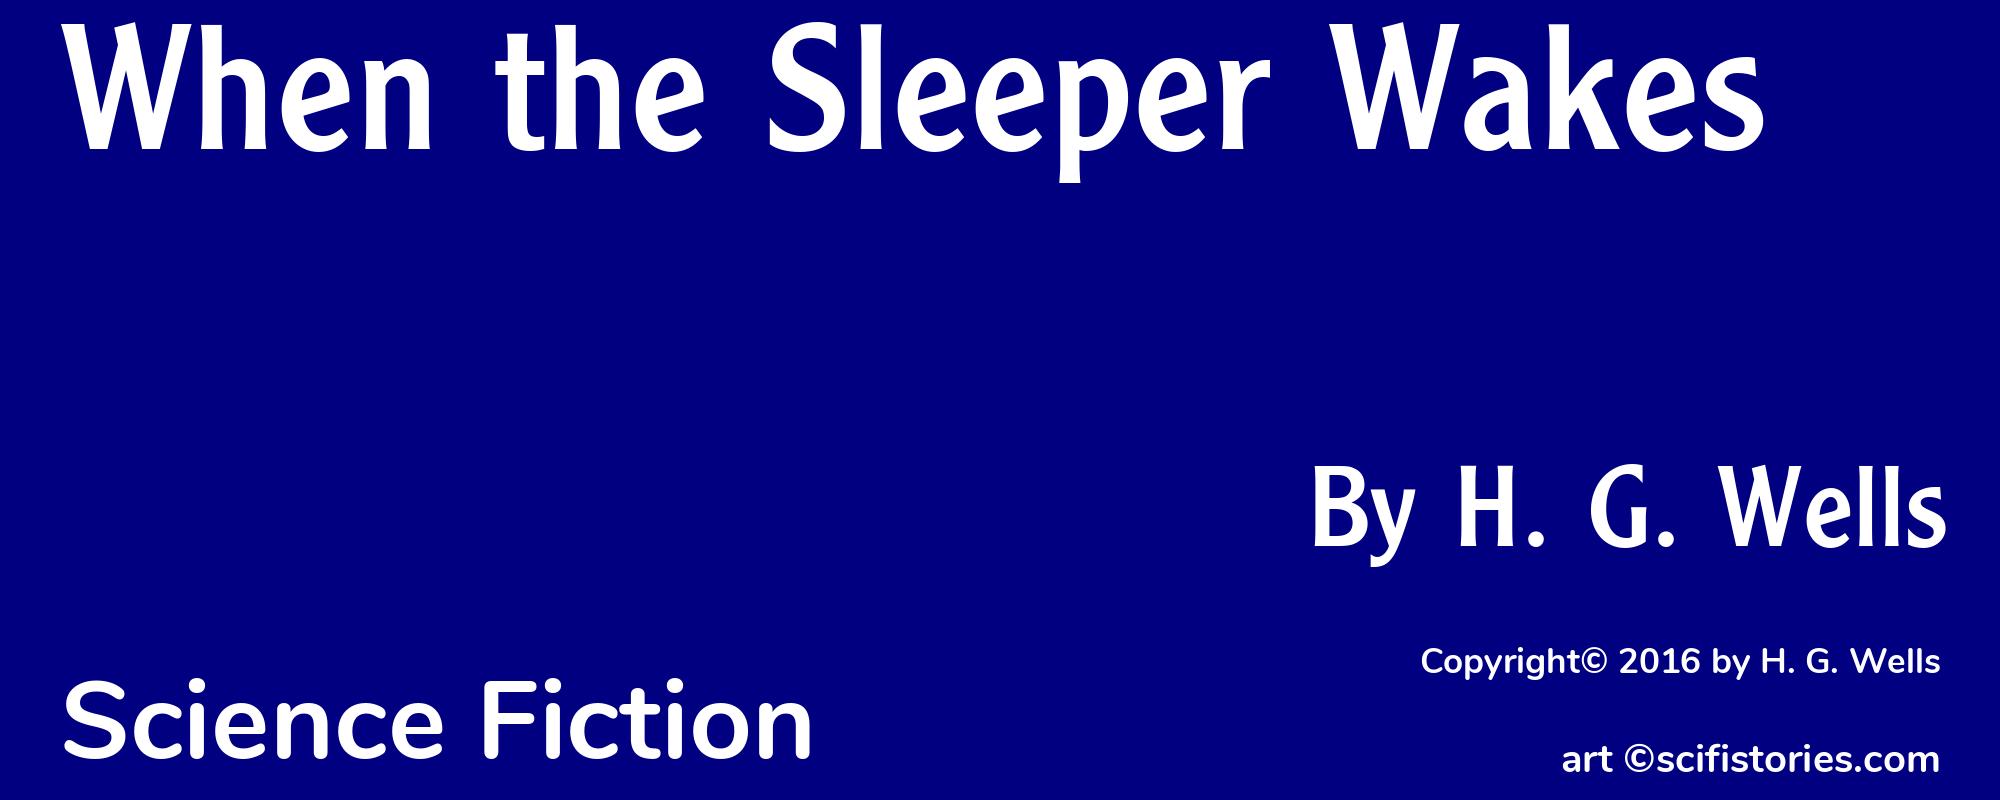 When the Sleeper Wakes - Cover